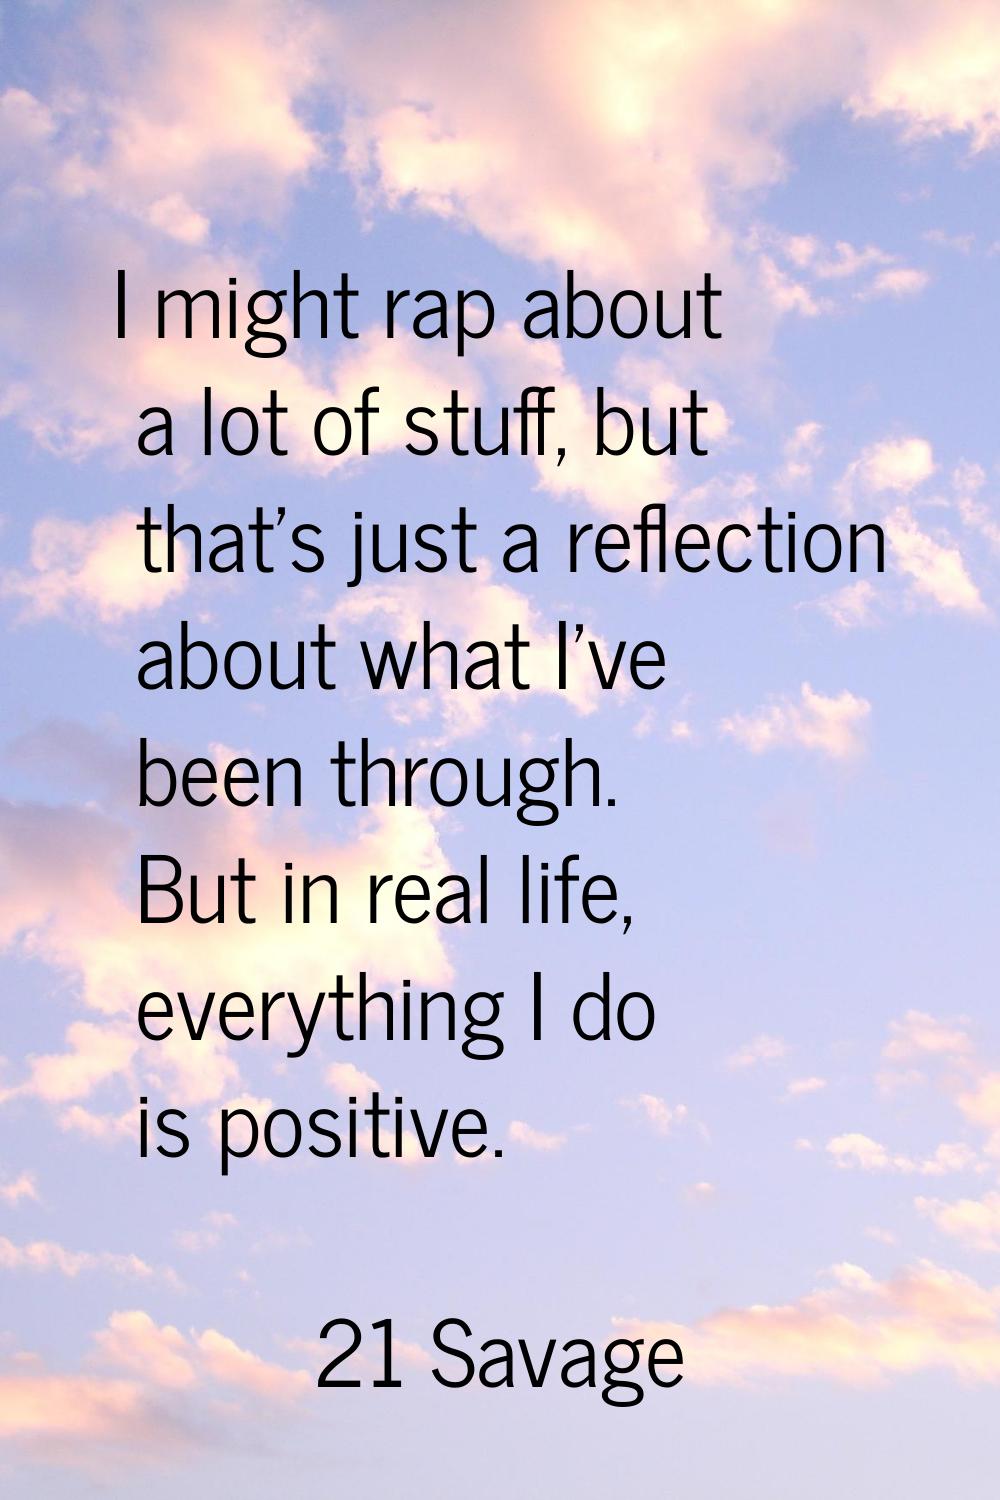 I might rap about a lot of stuff, but that's just a reflection about what I've been through. But in